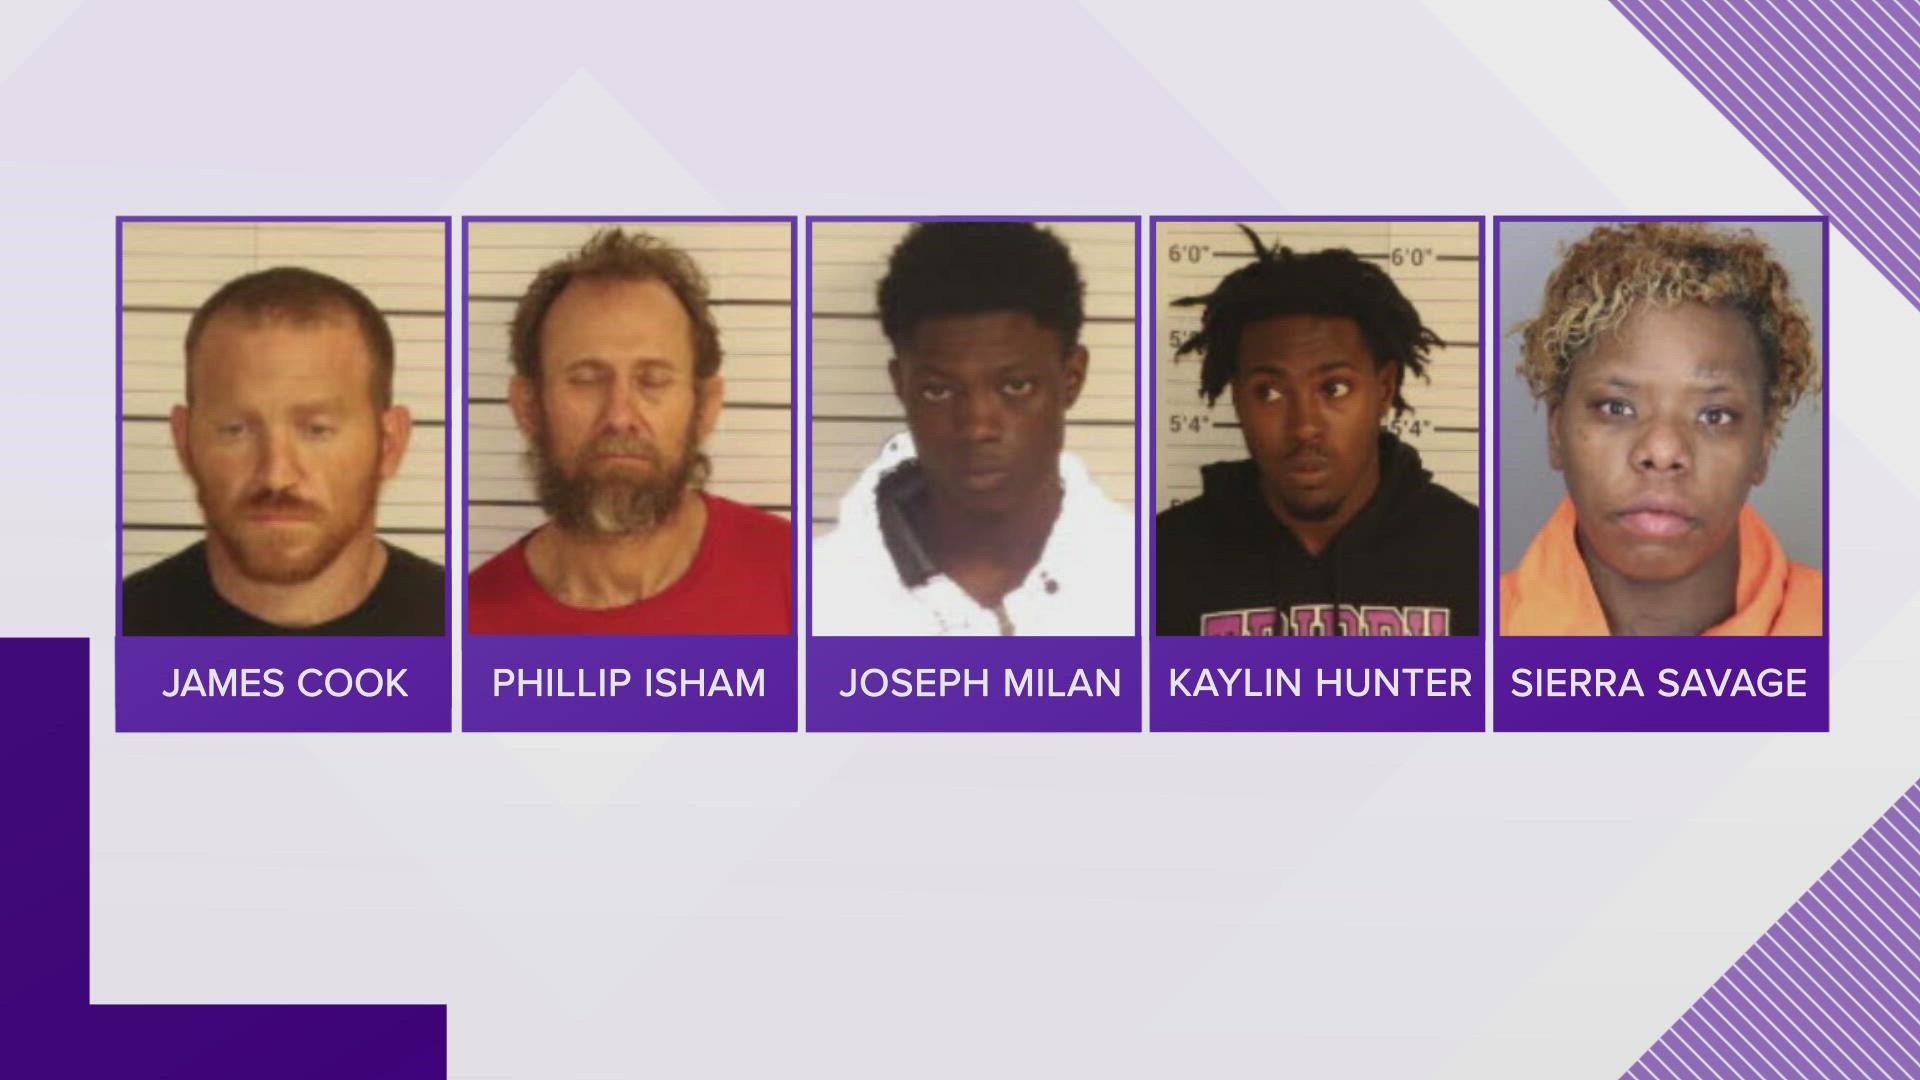 Memphis Police said the arrests happened over the course of two days - Wednesday and Thursday - from cases spanning back to December.